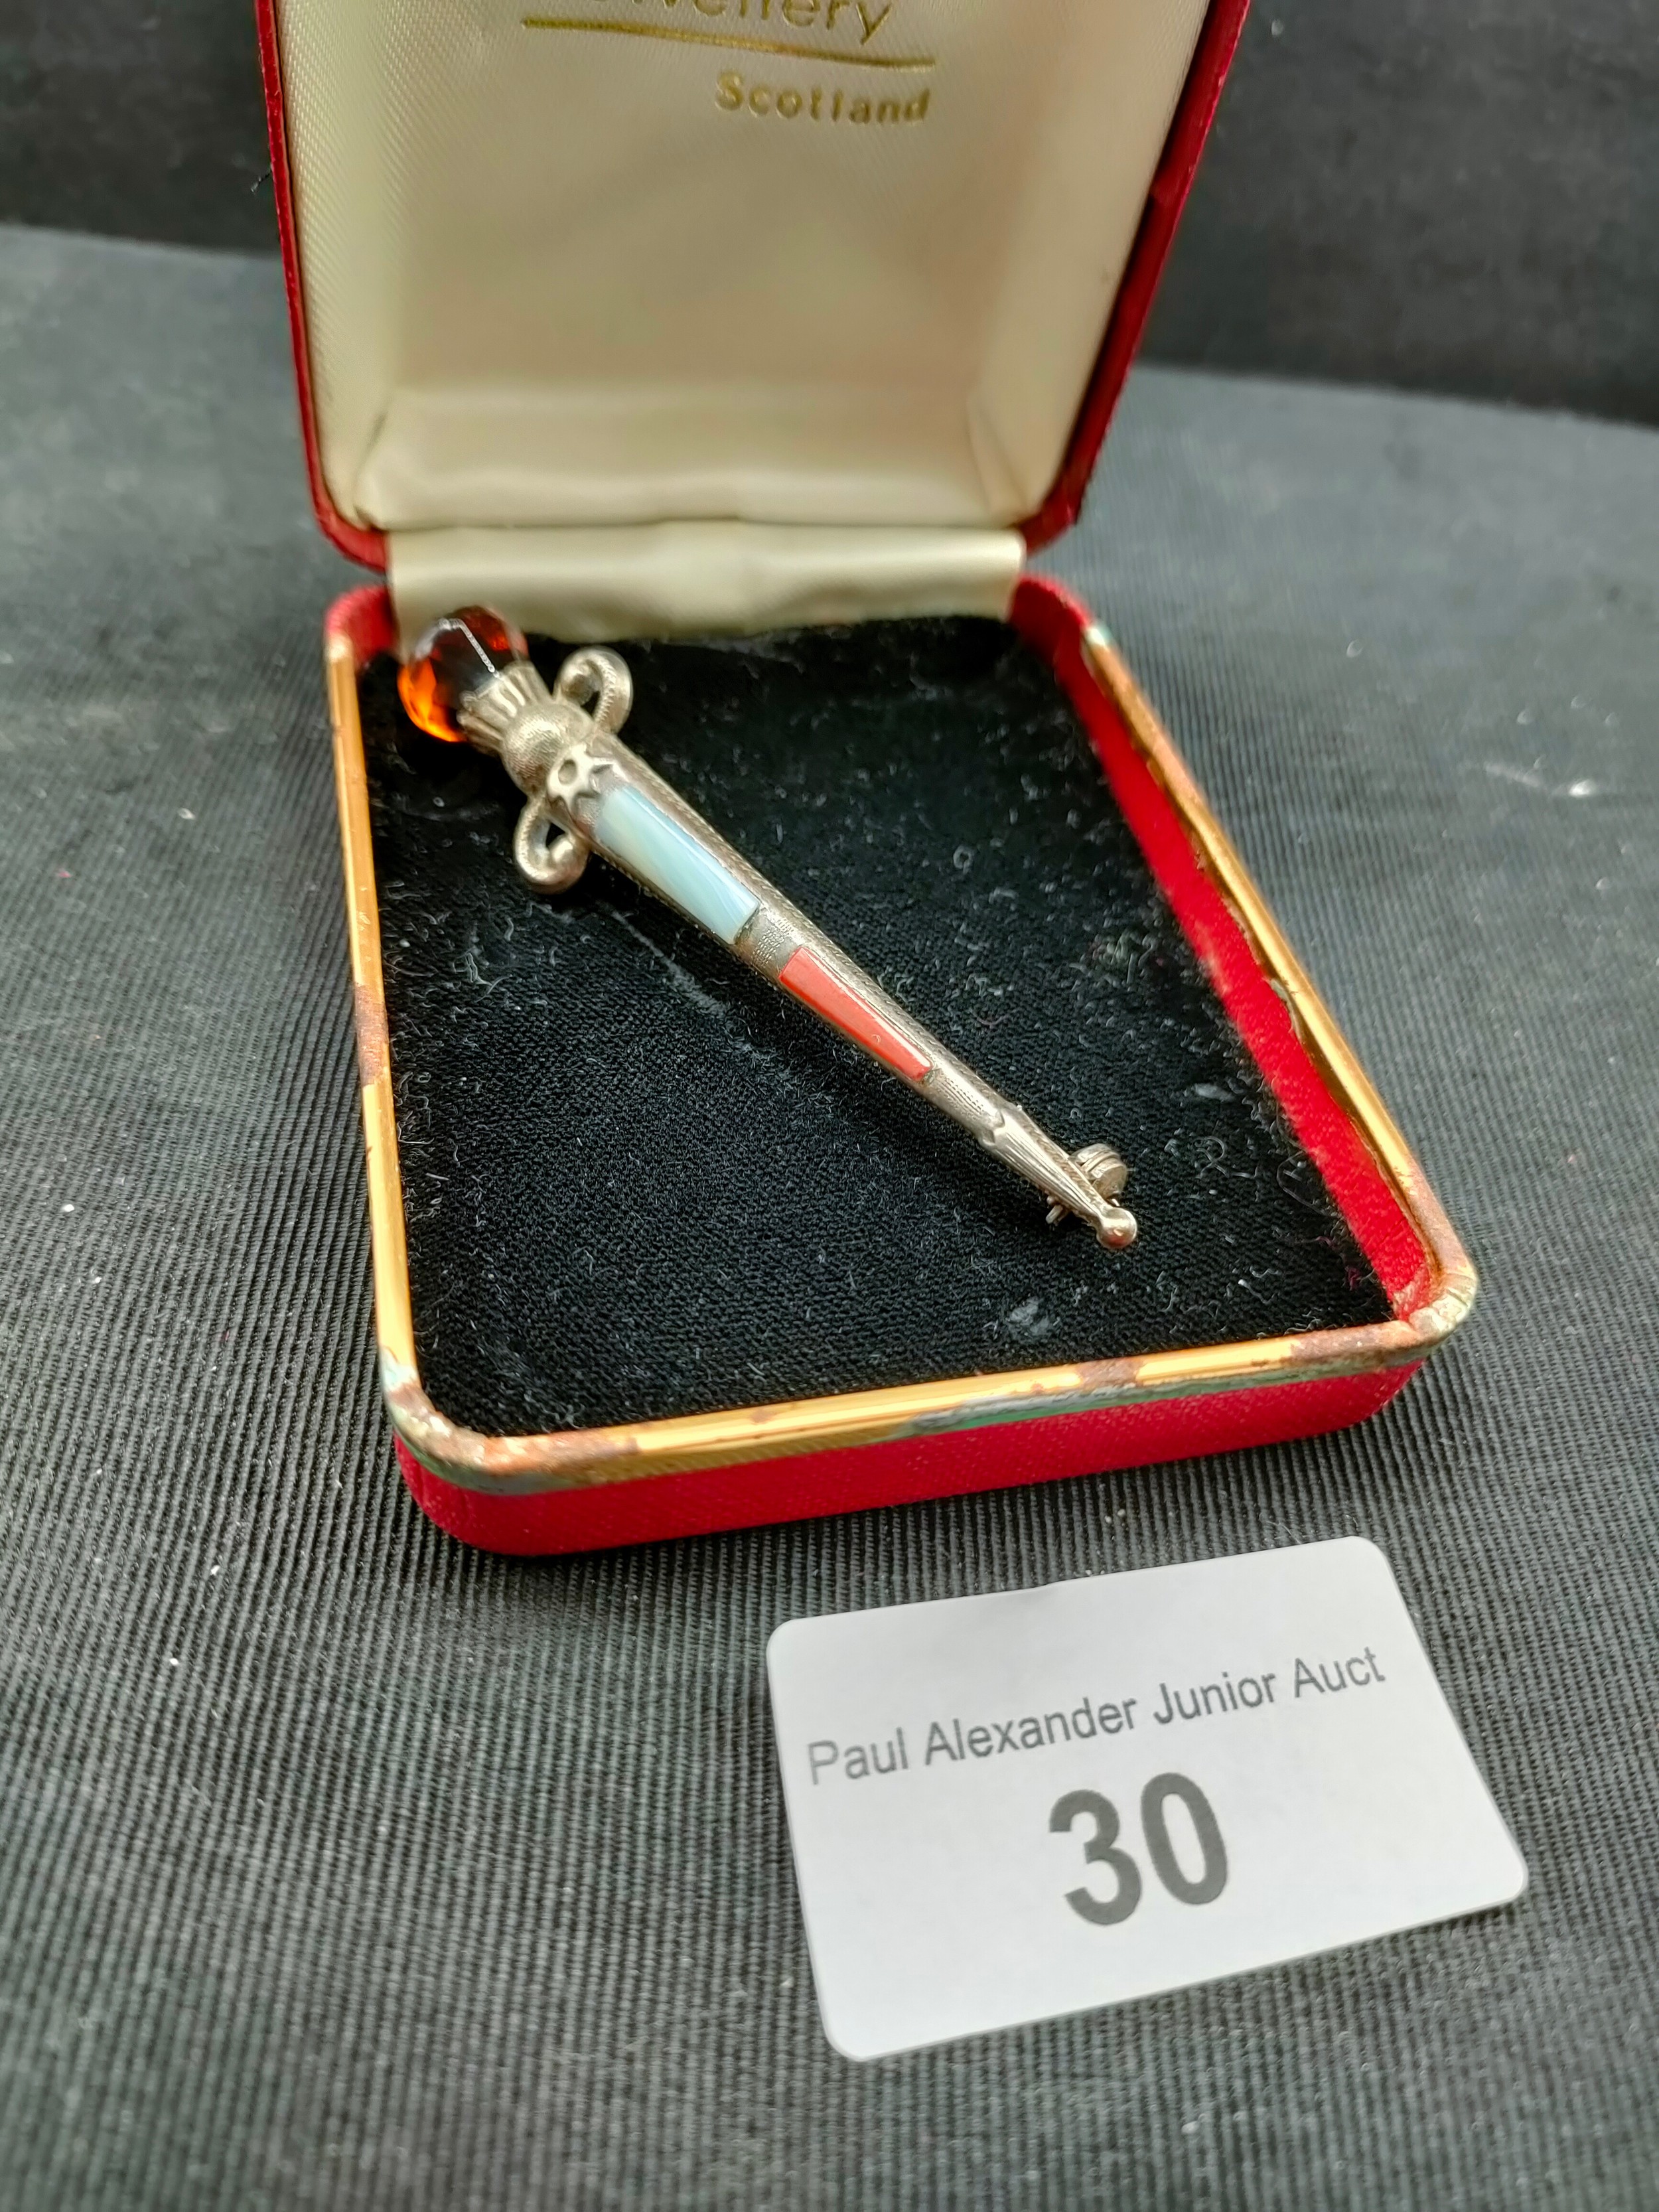 Scottish silver hall marked dagger brooch with agate stone makers Robert alison ( RA) - Image 2 of 3